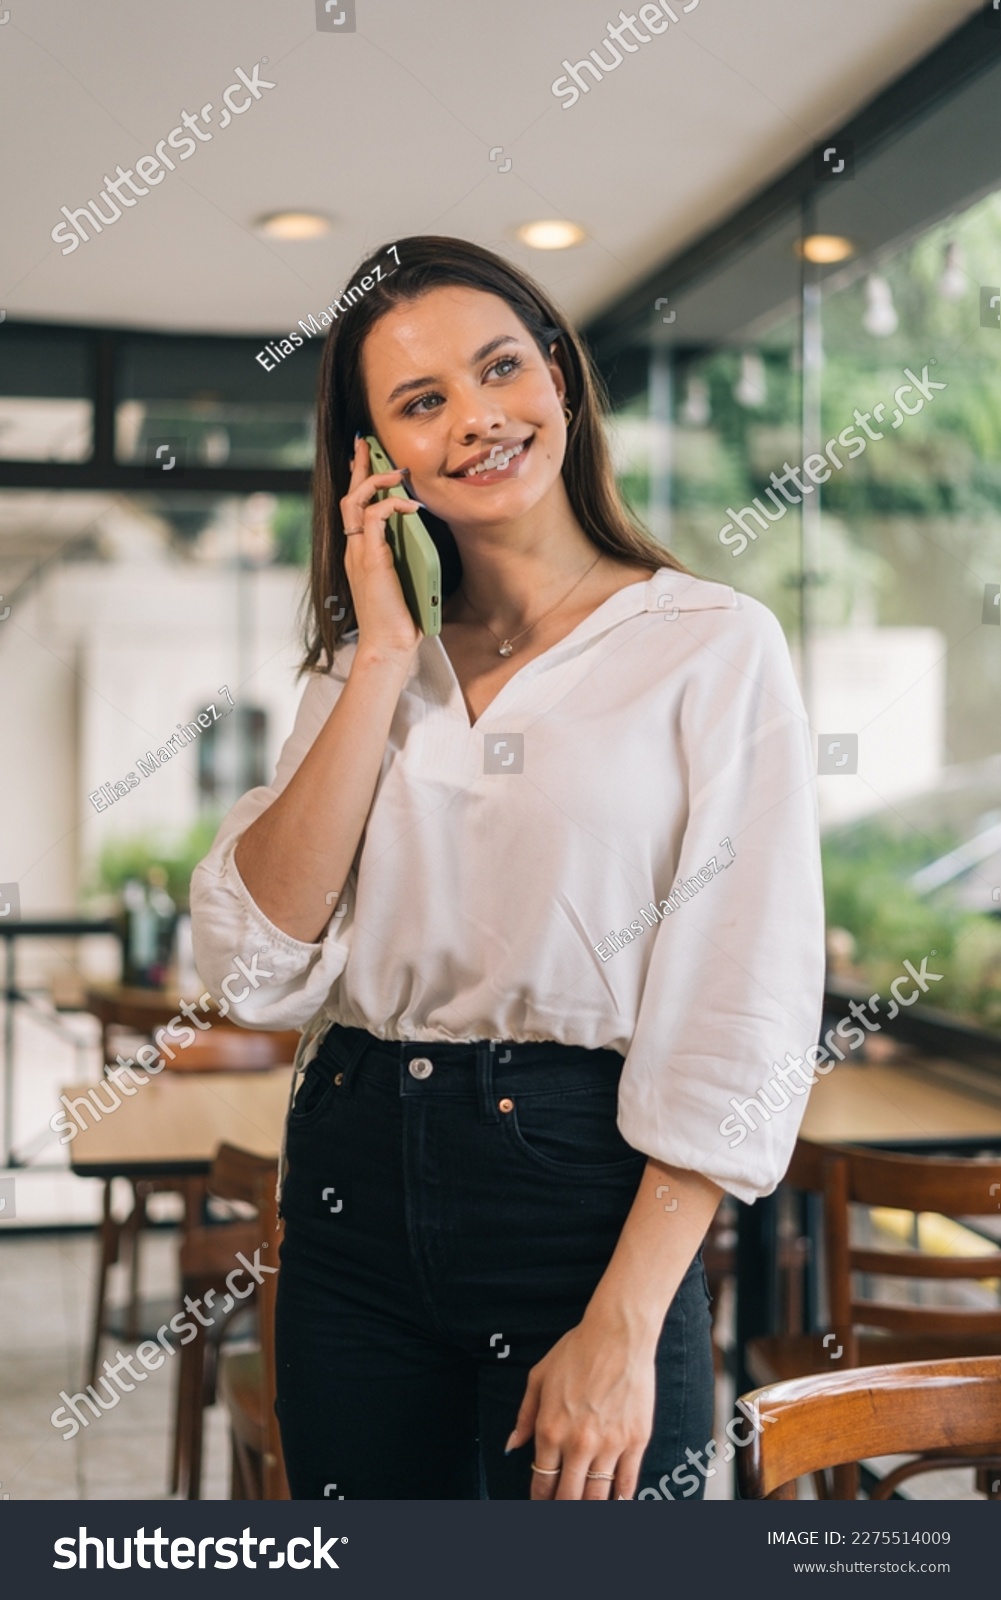 Concept of smiling woman making calls with a telephone in her office. Vertical photo of a person taking order on the phone #2275514009